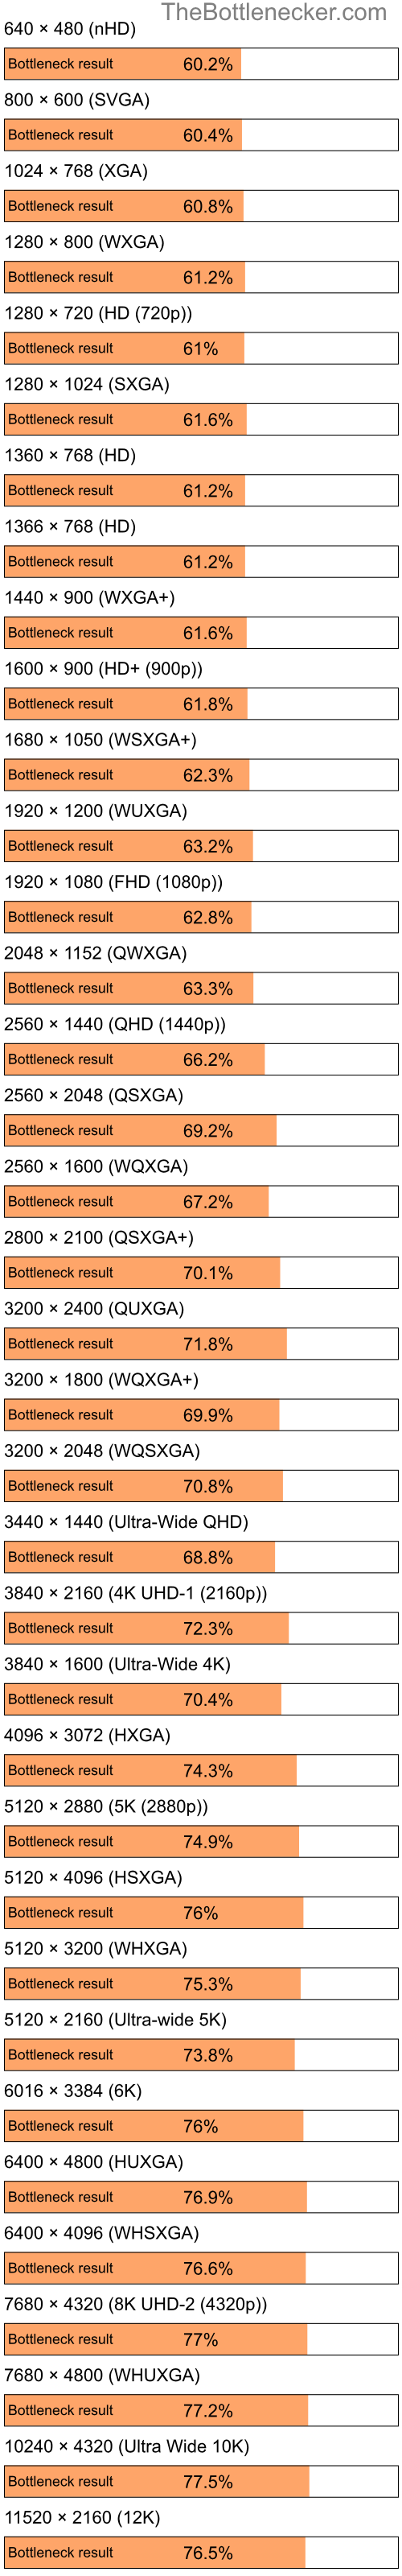 Bottleneck results by resolution for Intel Pentium 4 and AMD Mobility Radeon HD 3430 in7 Days to Die